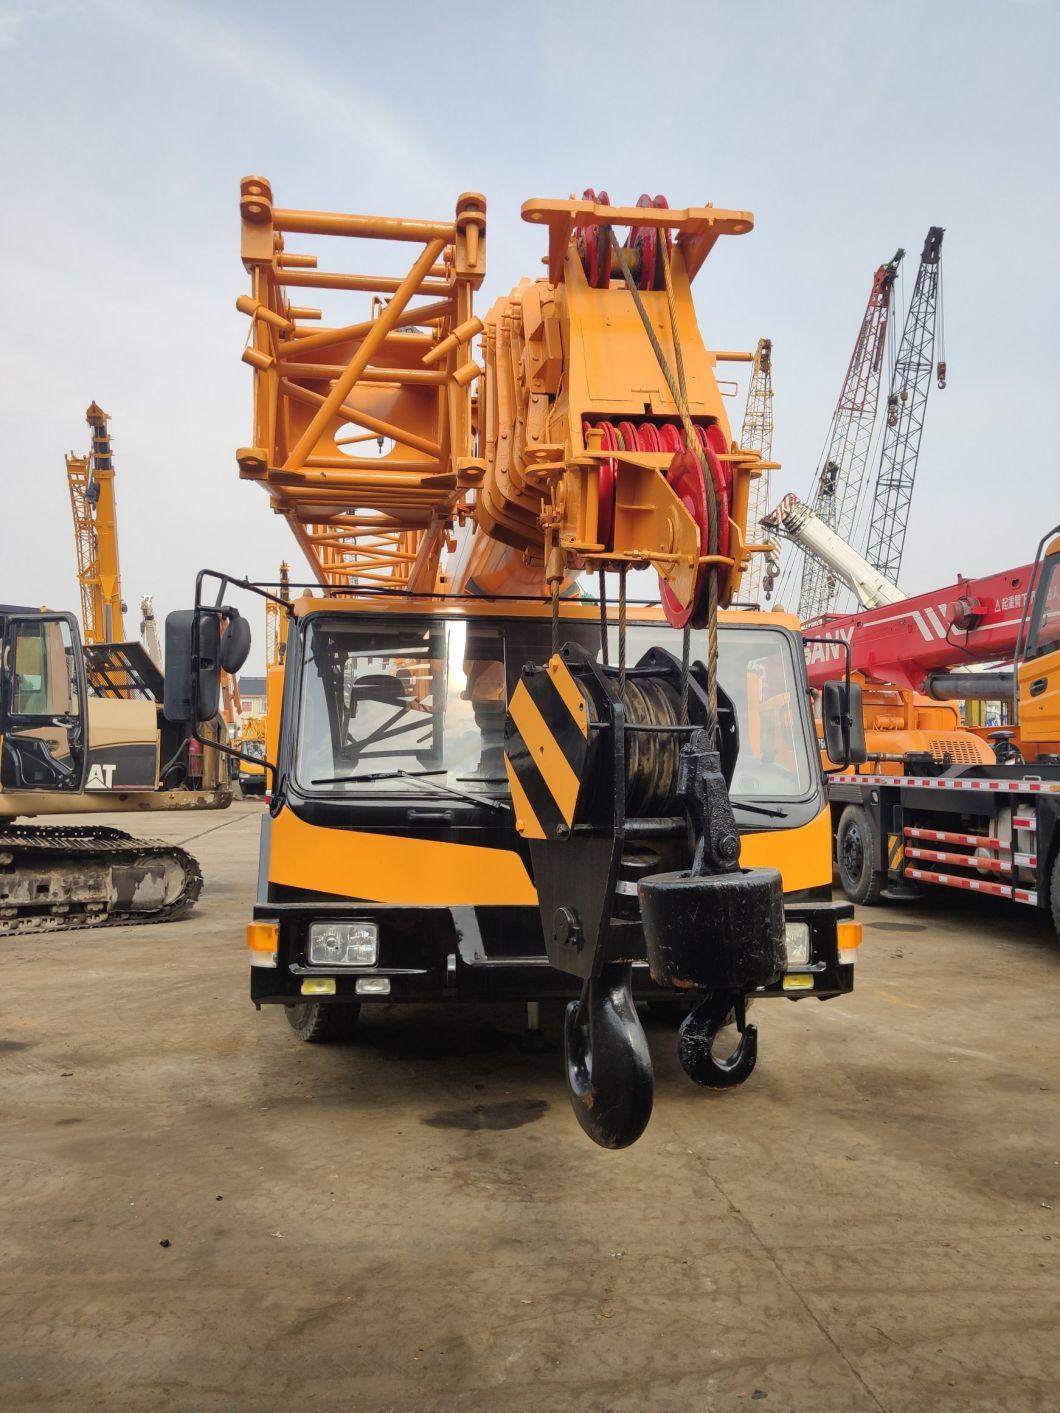 90% New Truck Crane 50 Ton New Arrival in Our Factory! / 50t Qy50K Truck Crane Made in China